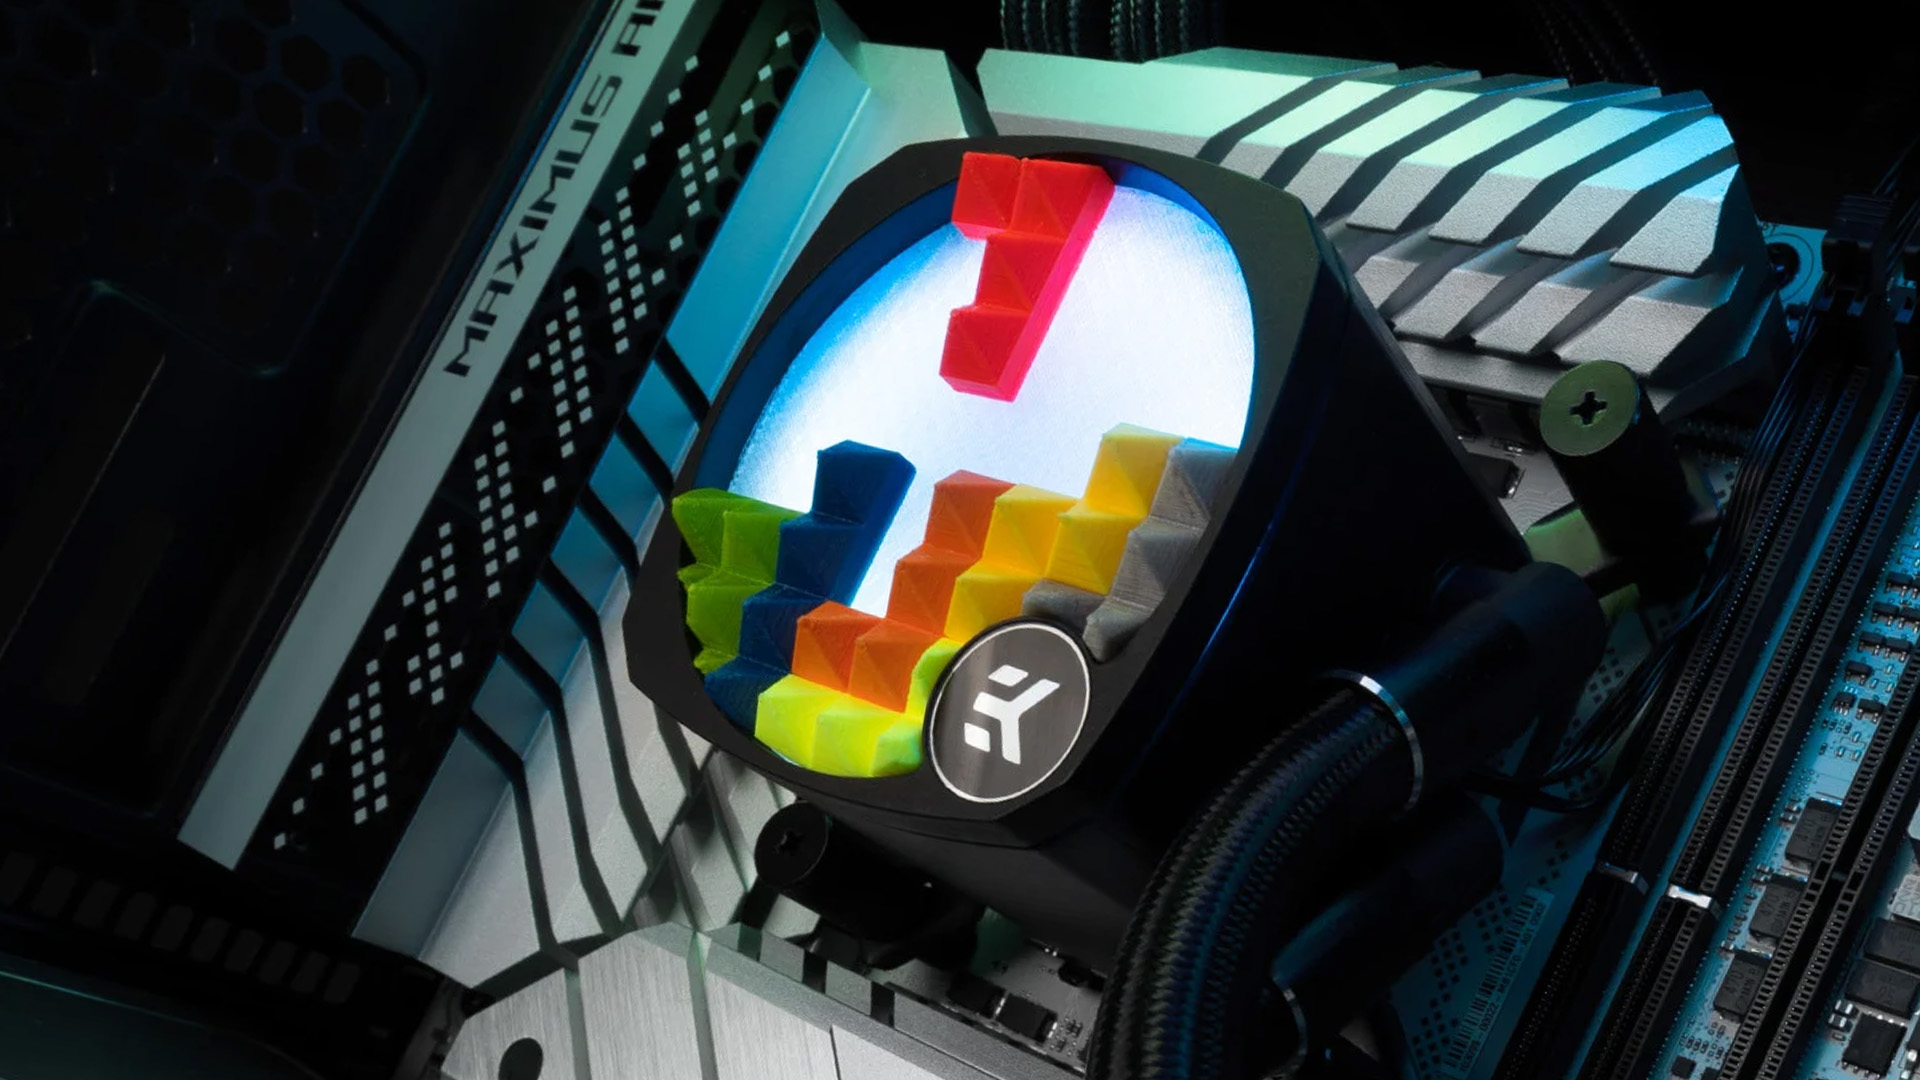 EK just created my new favorite way to customize your gaming PC